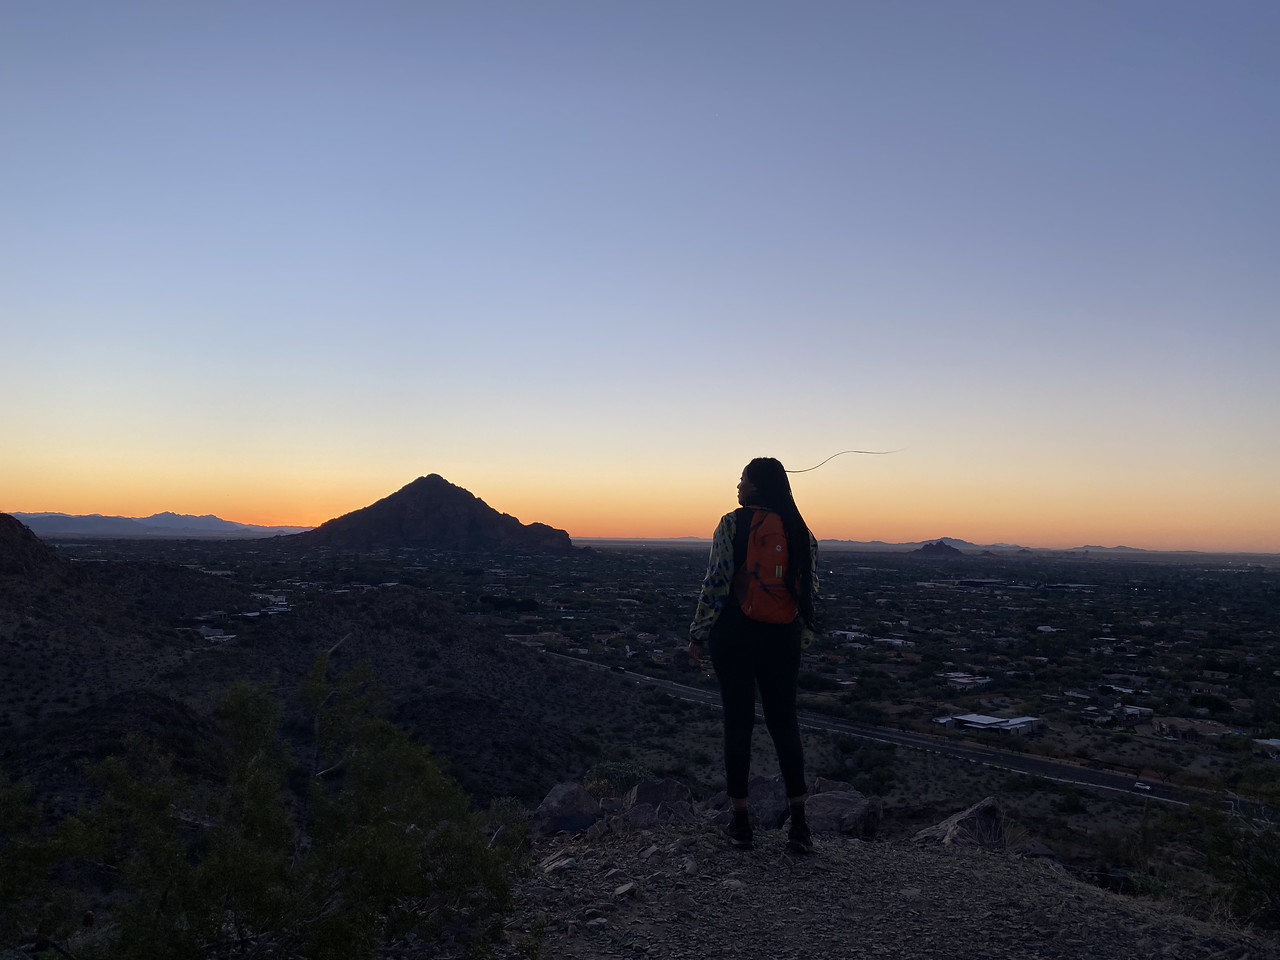 A Wild Bunch guest revels in the amazing scenery during one of our sunrise Phoenix hiking tours.